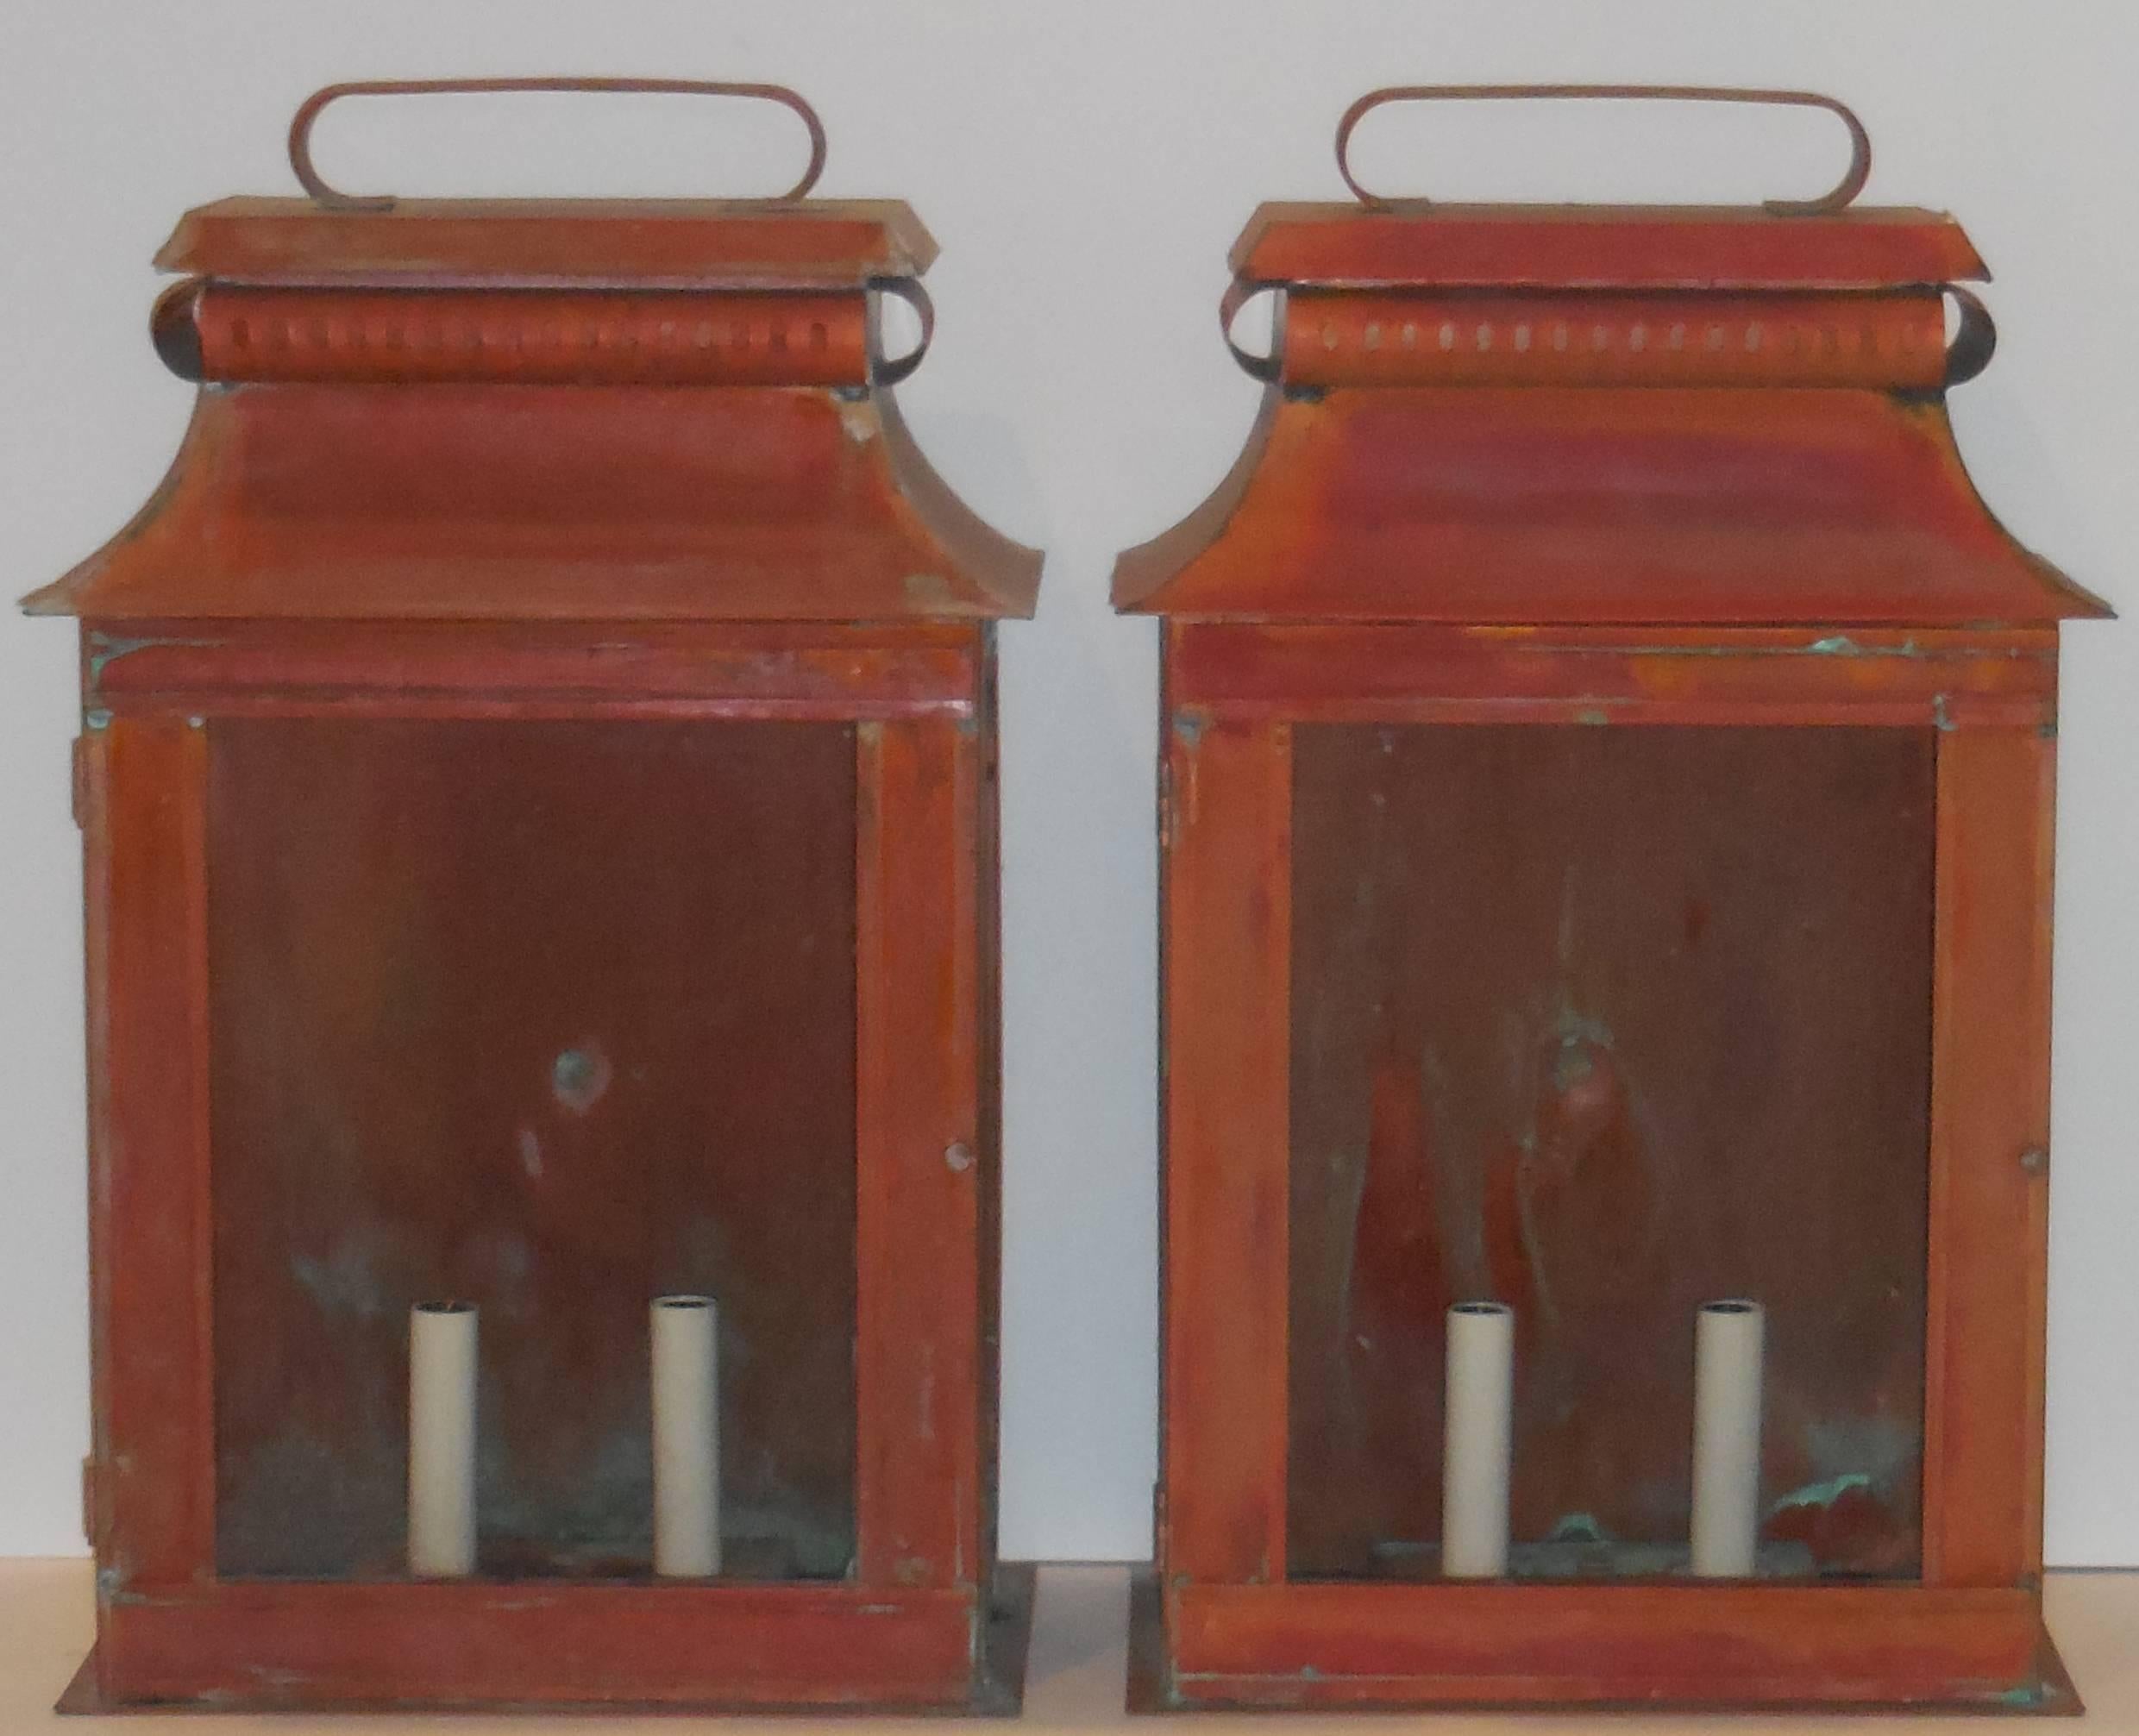 American Pair of Large Architectural Wall Copper Lantern